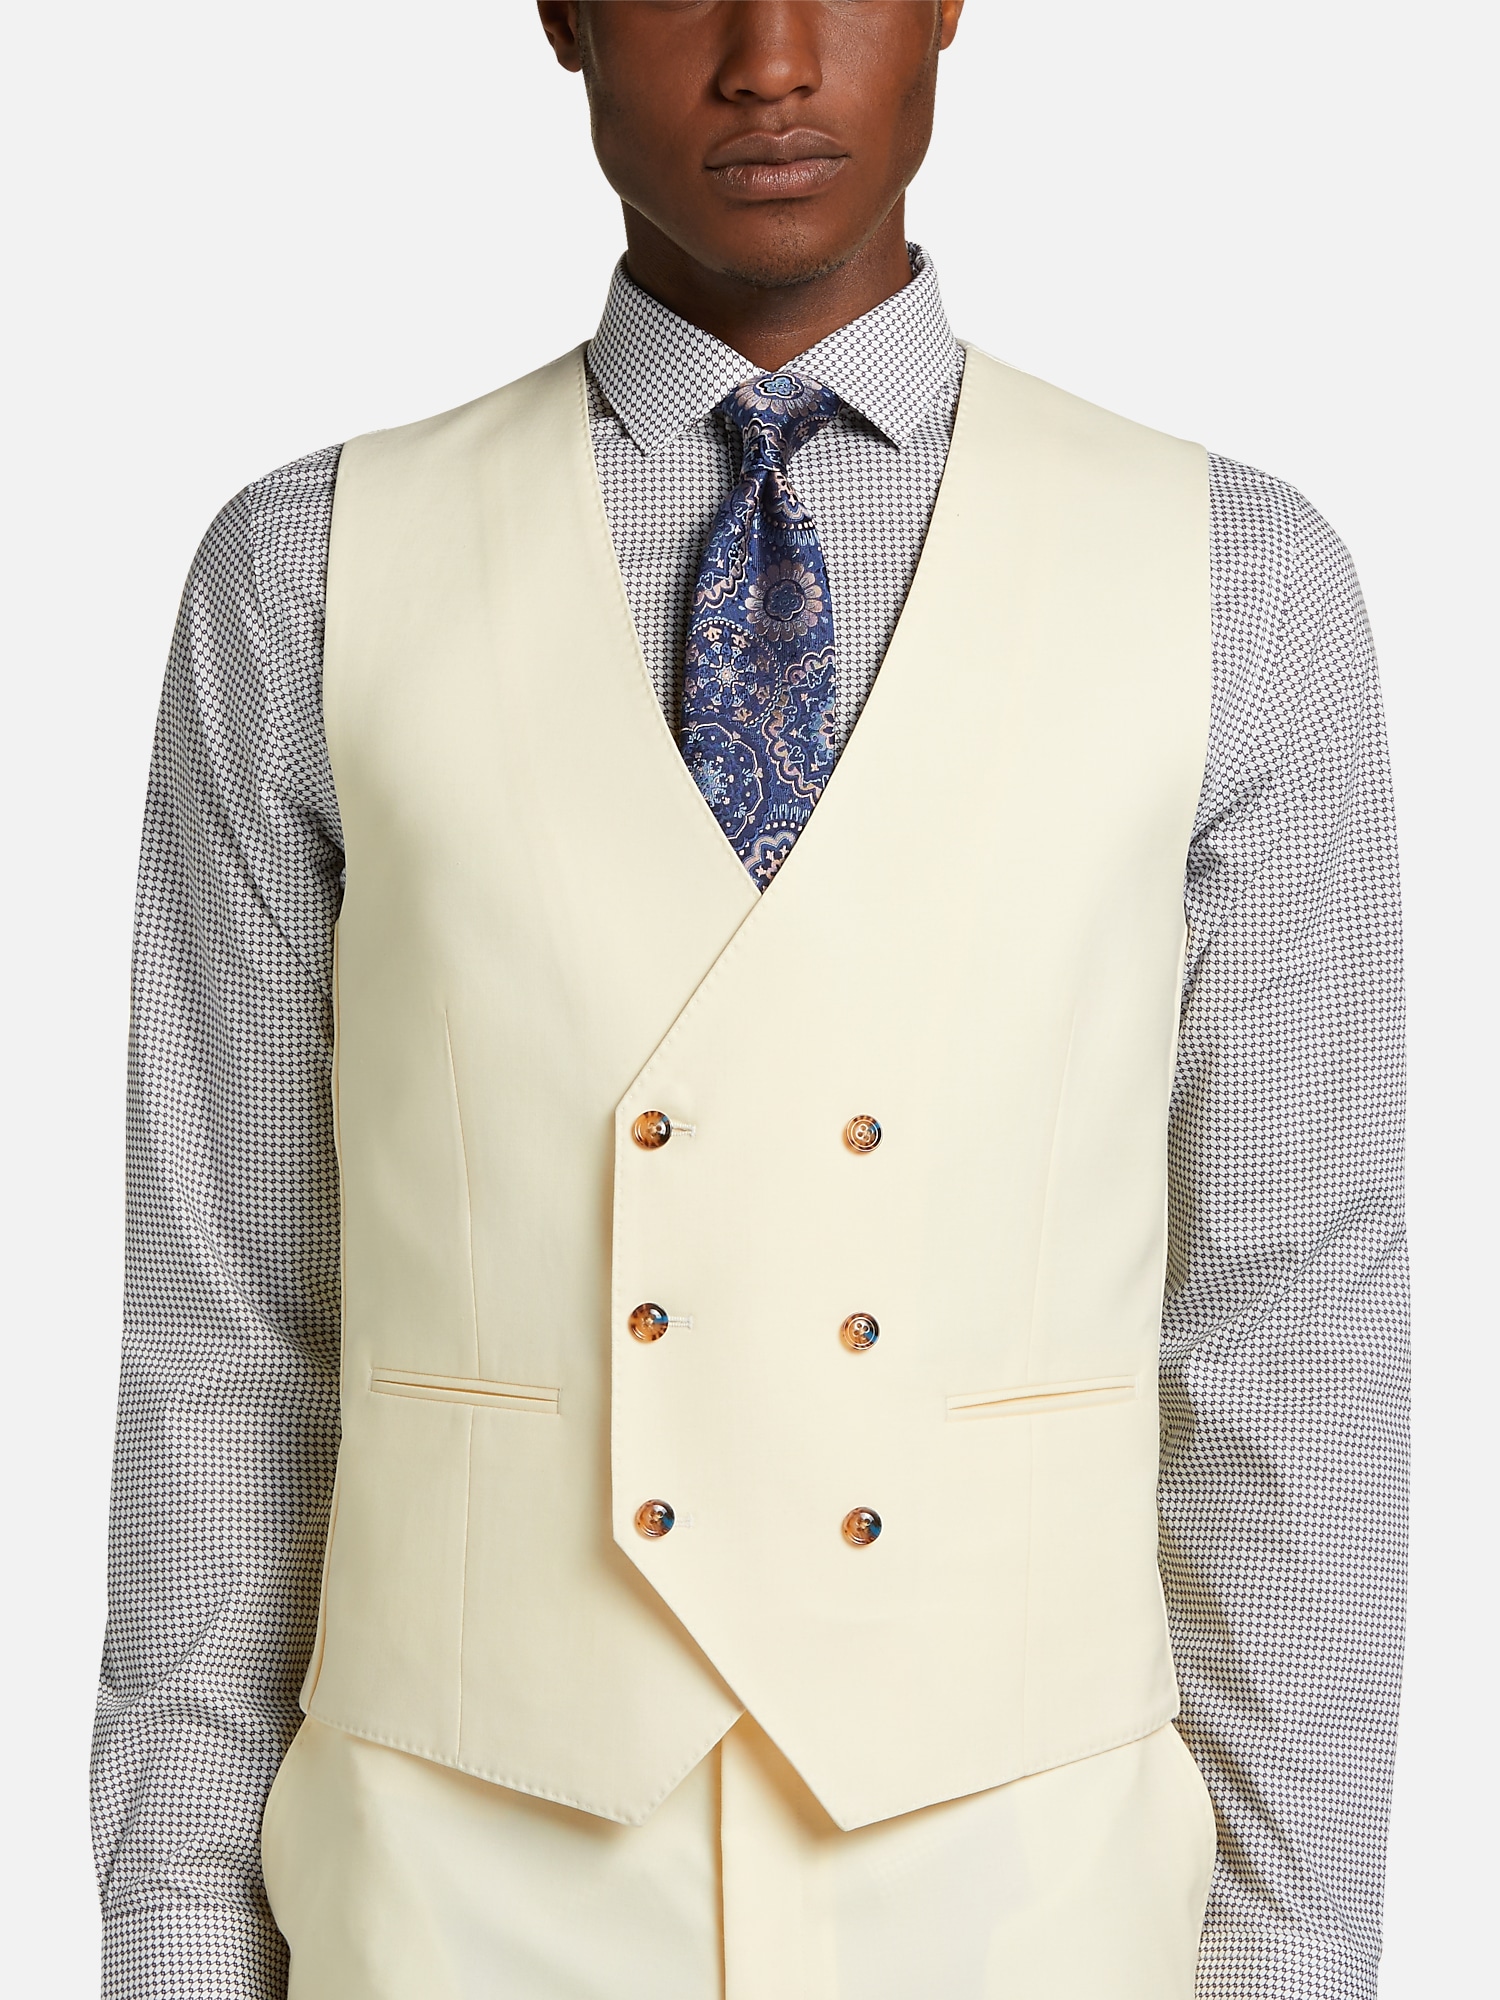 Tayion Classic Fit Suit Separates Solid Double Breasted Vest only $19.99: eDeal Info